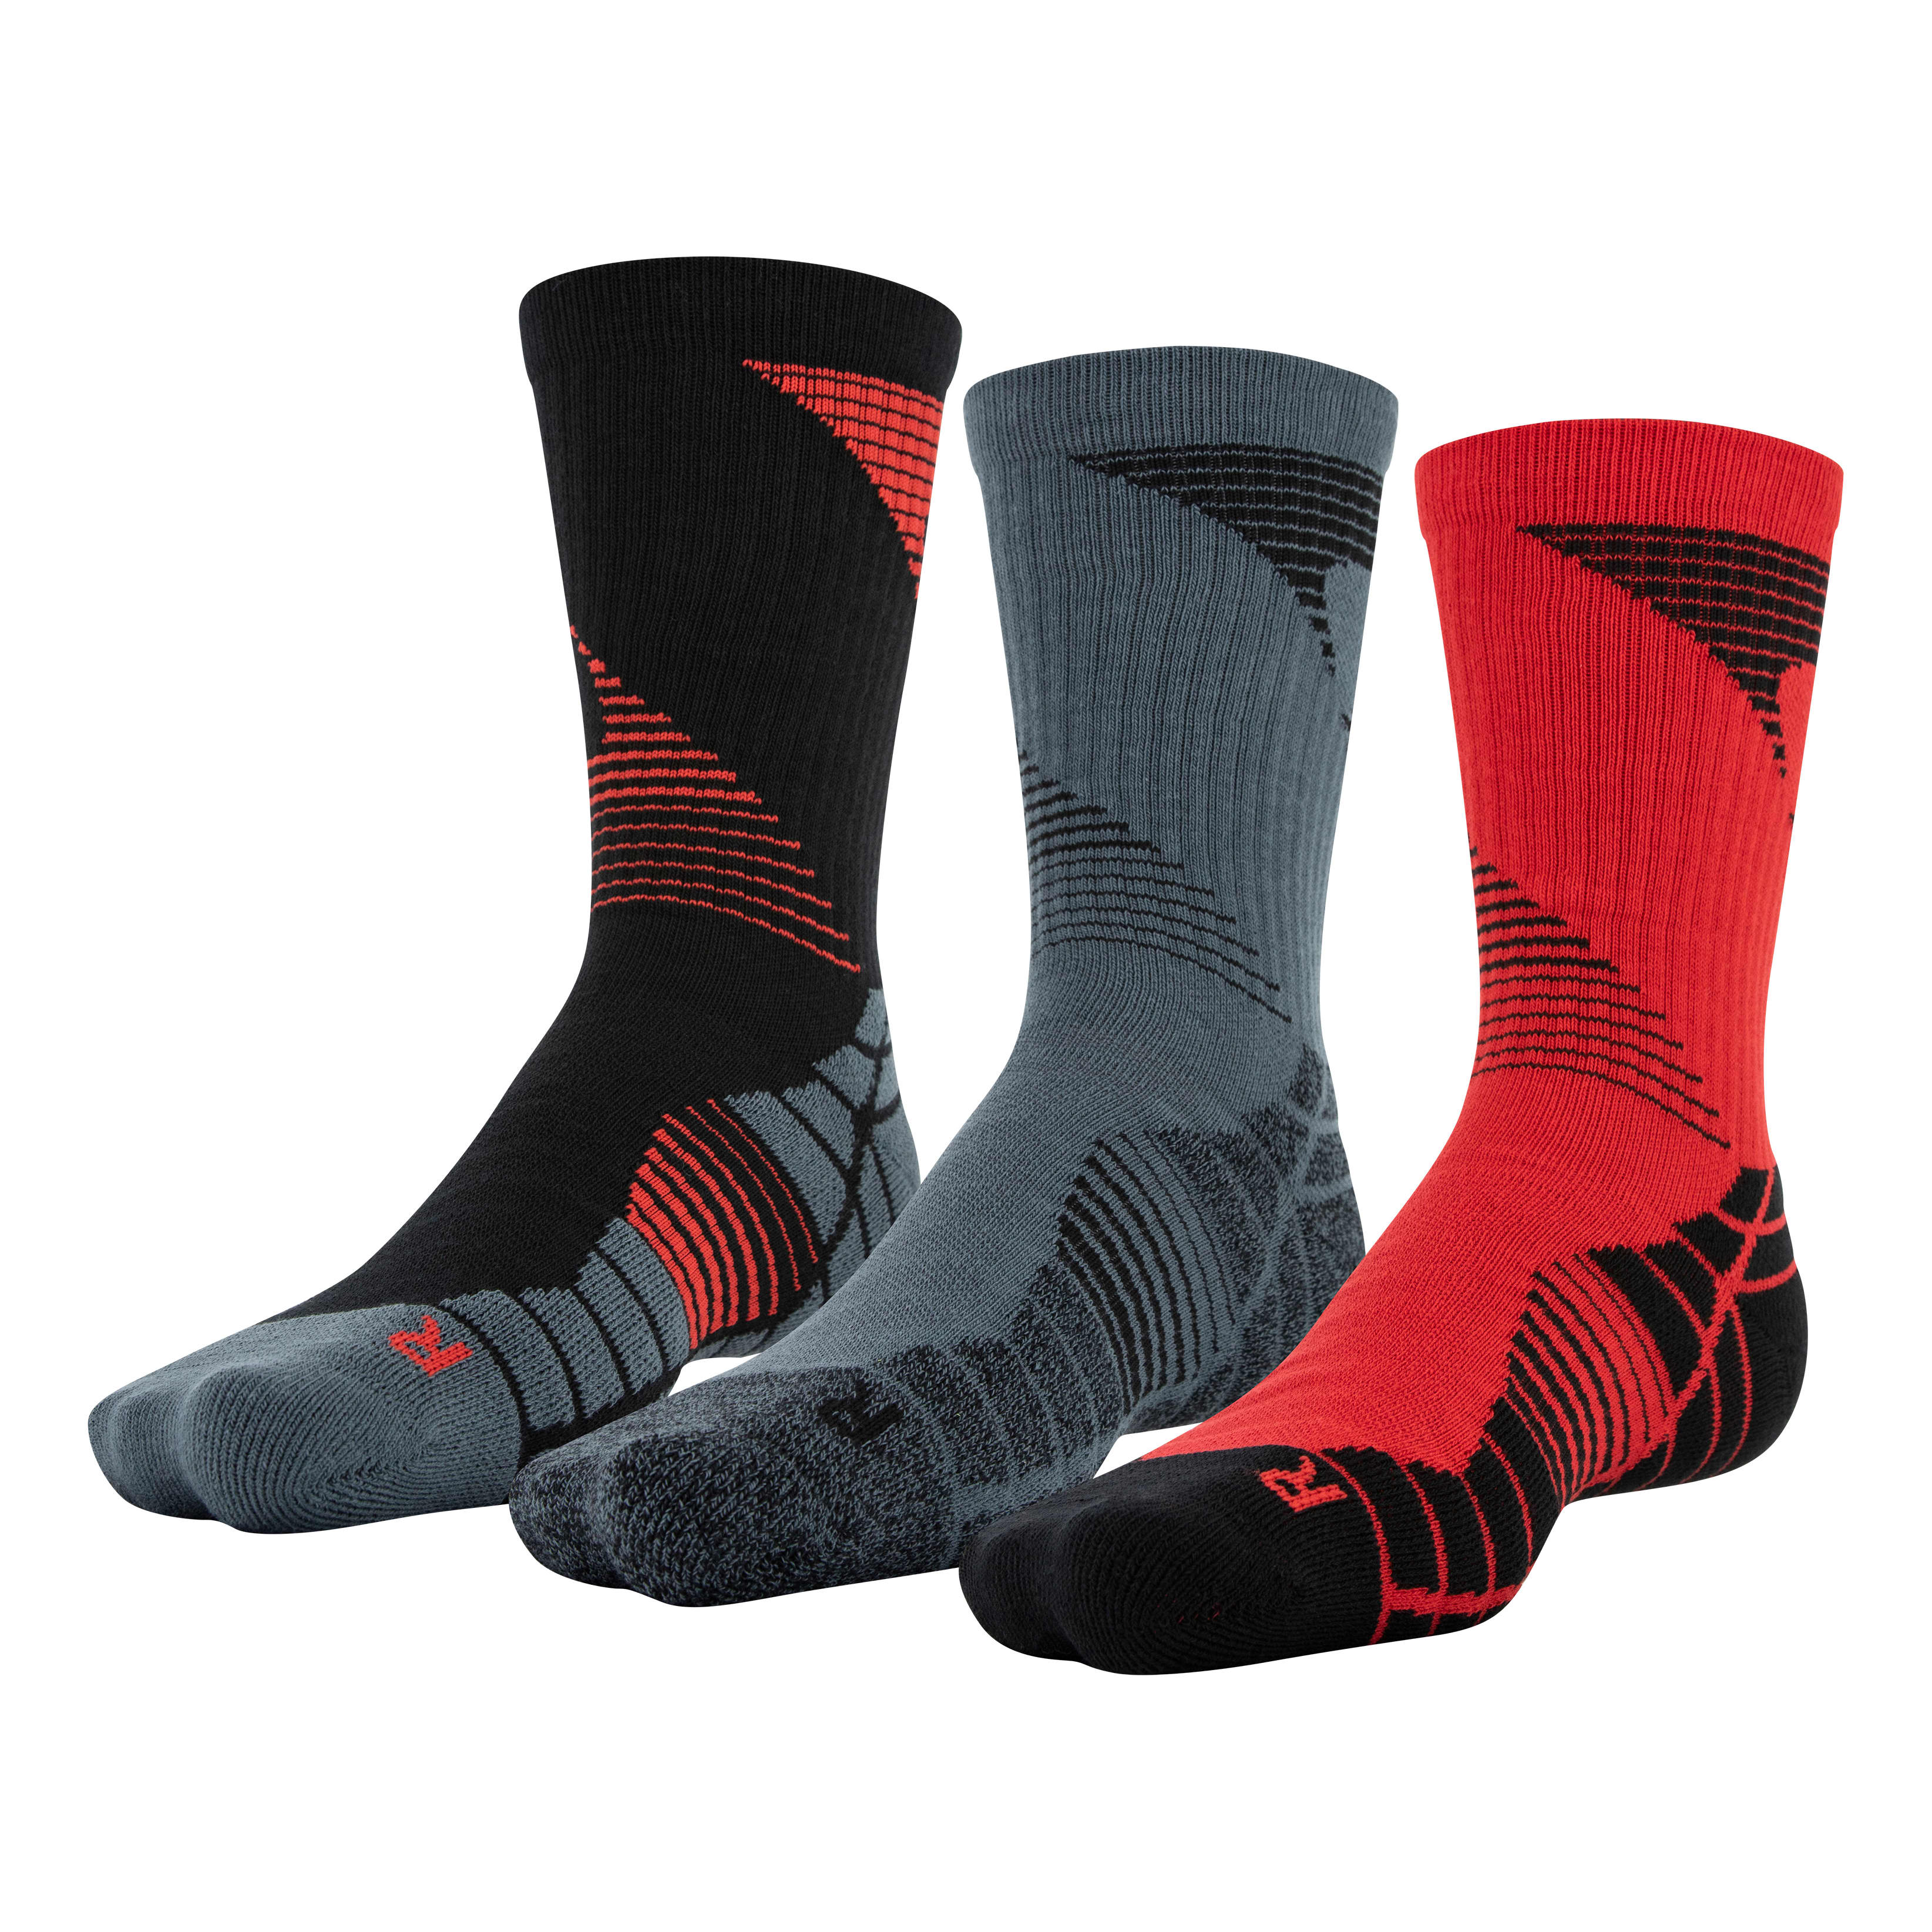 Under Armour® Men’s Elevated Novelty Crew Sock - Red/Pitch Grey/Black